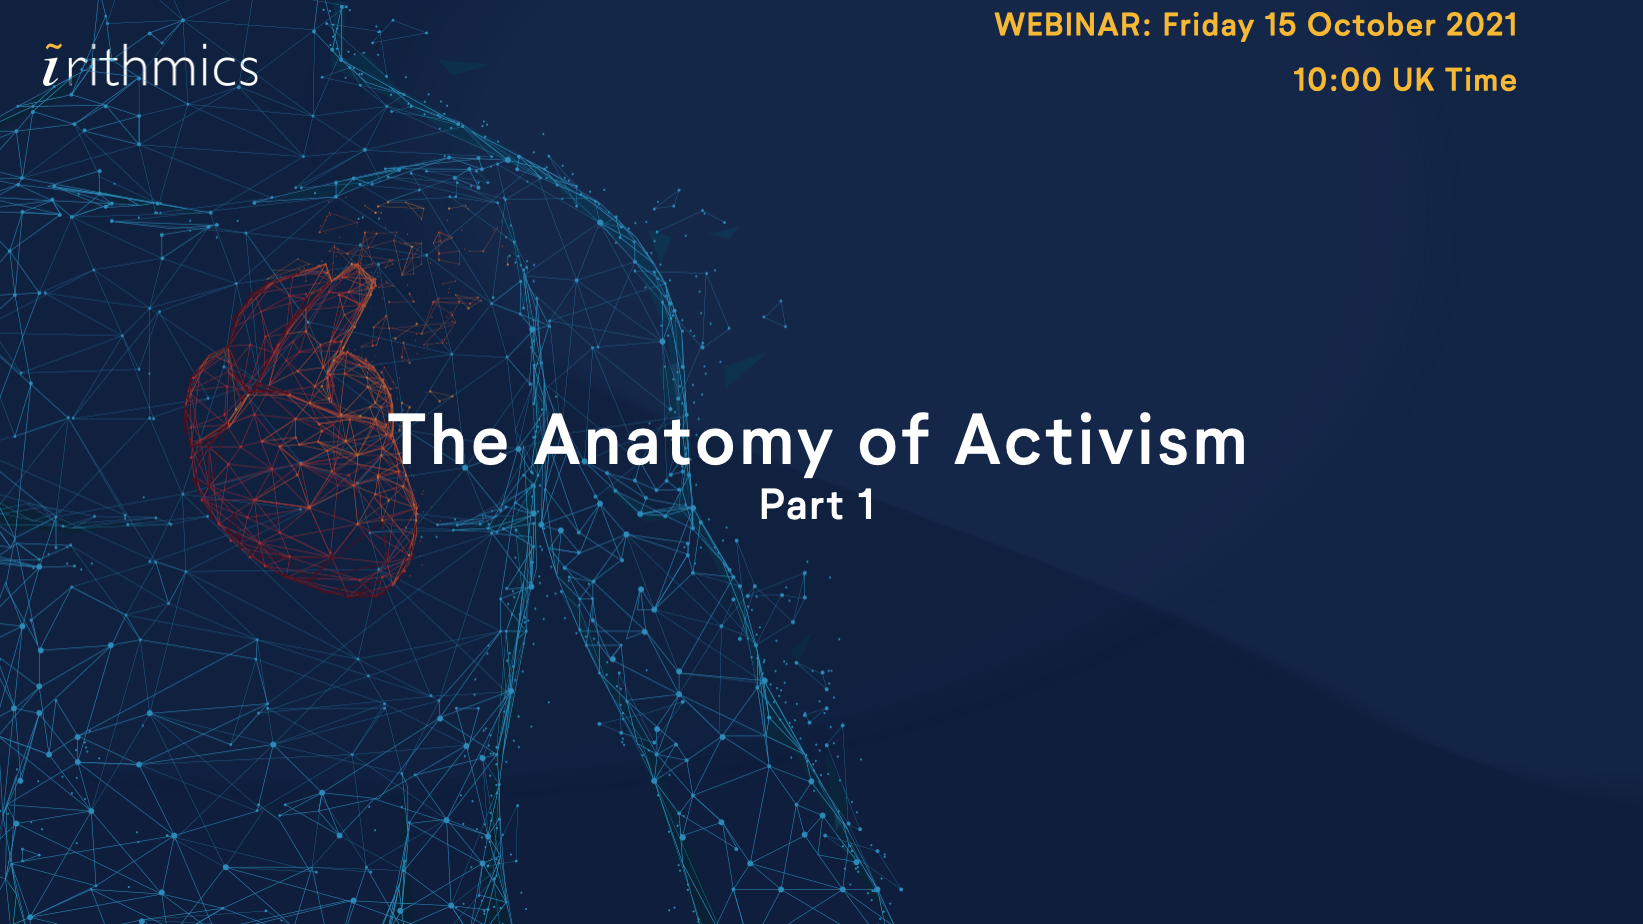 The Anatomy of Activism (Part 1) Friday 15 October 2021